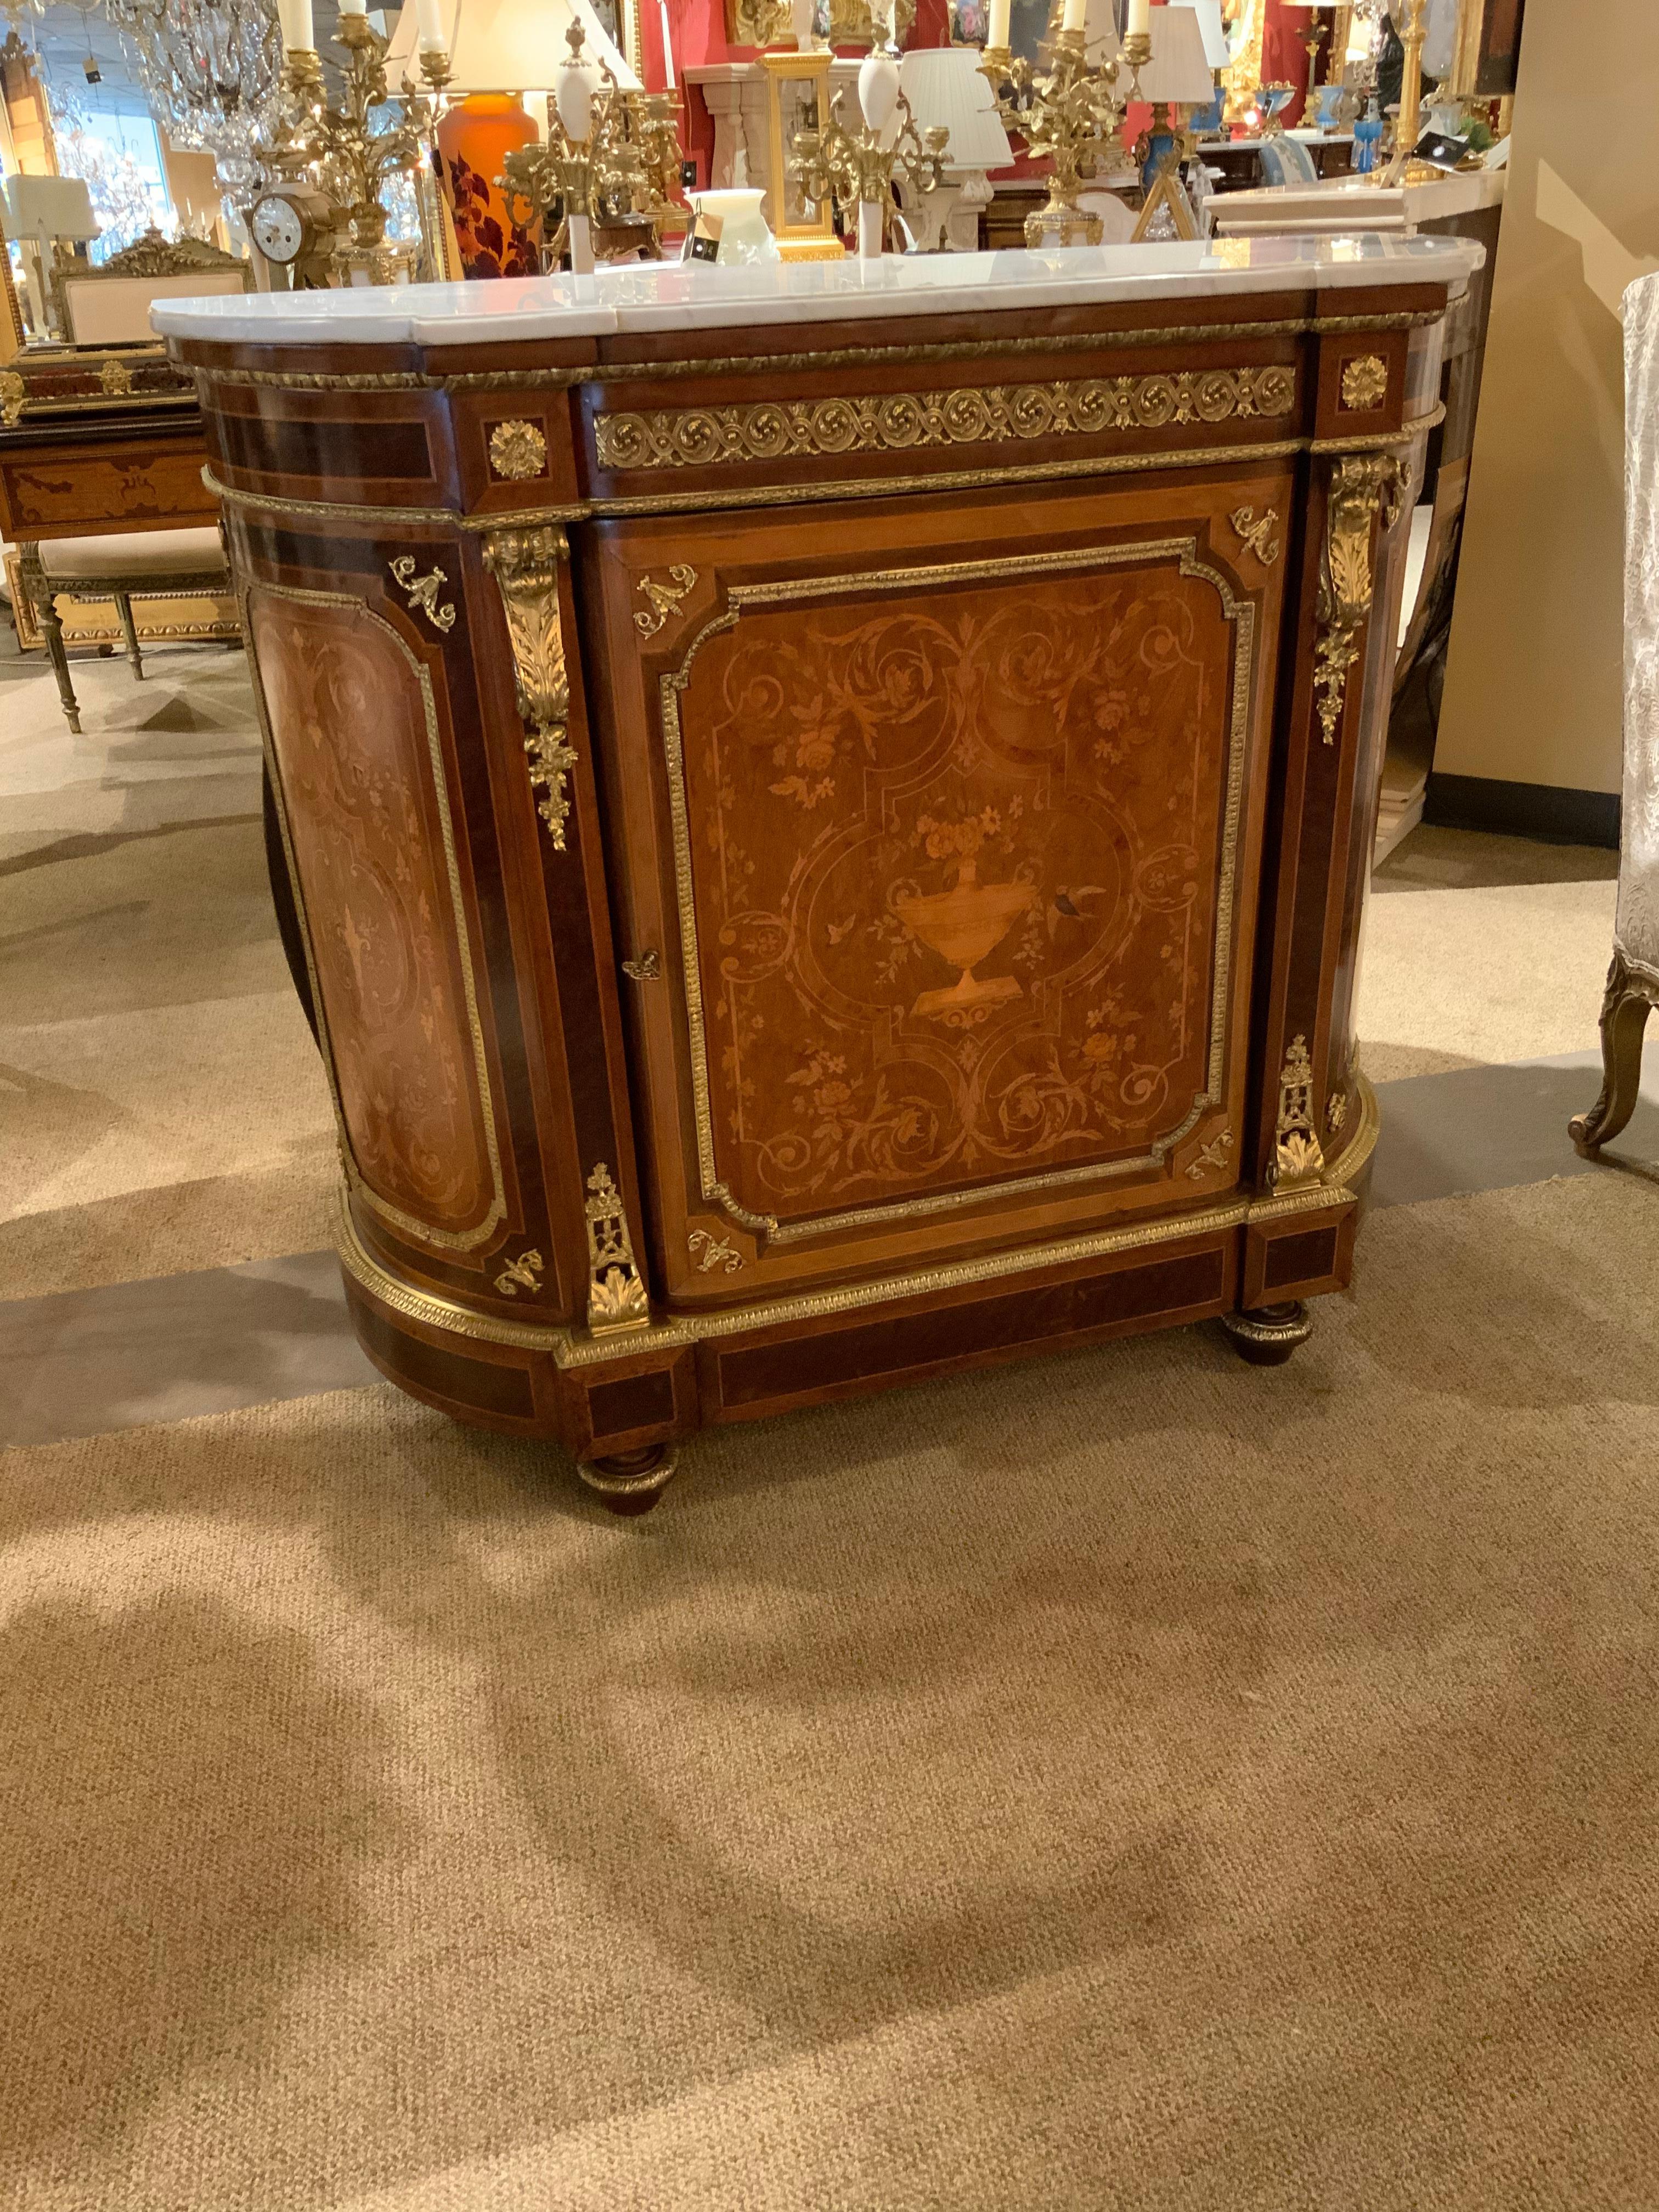 Exceptional quality and style. This is a gracefully curved cabinet with beautiful 
Inlay of fine and various woods. It has bronze dore mounts that are original 
The inlay design depicts floral, foliate designs with birds. It has two shelves
And